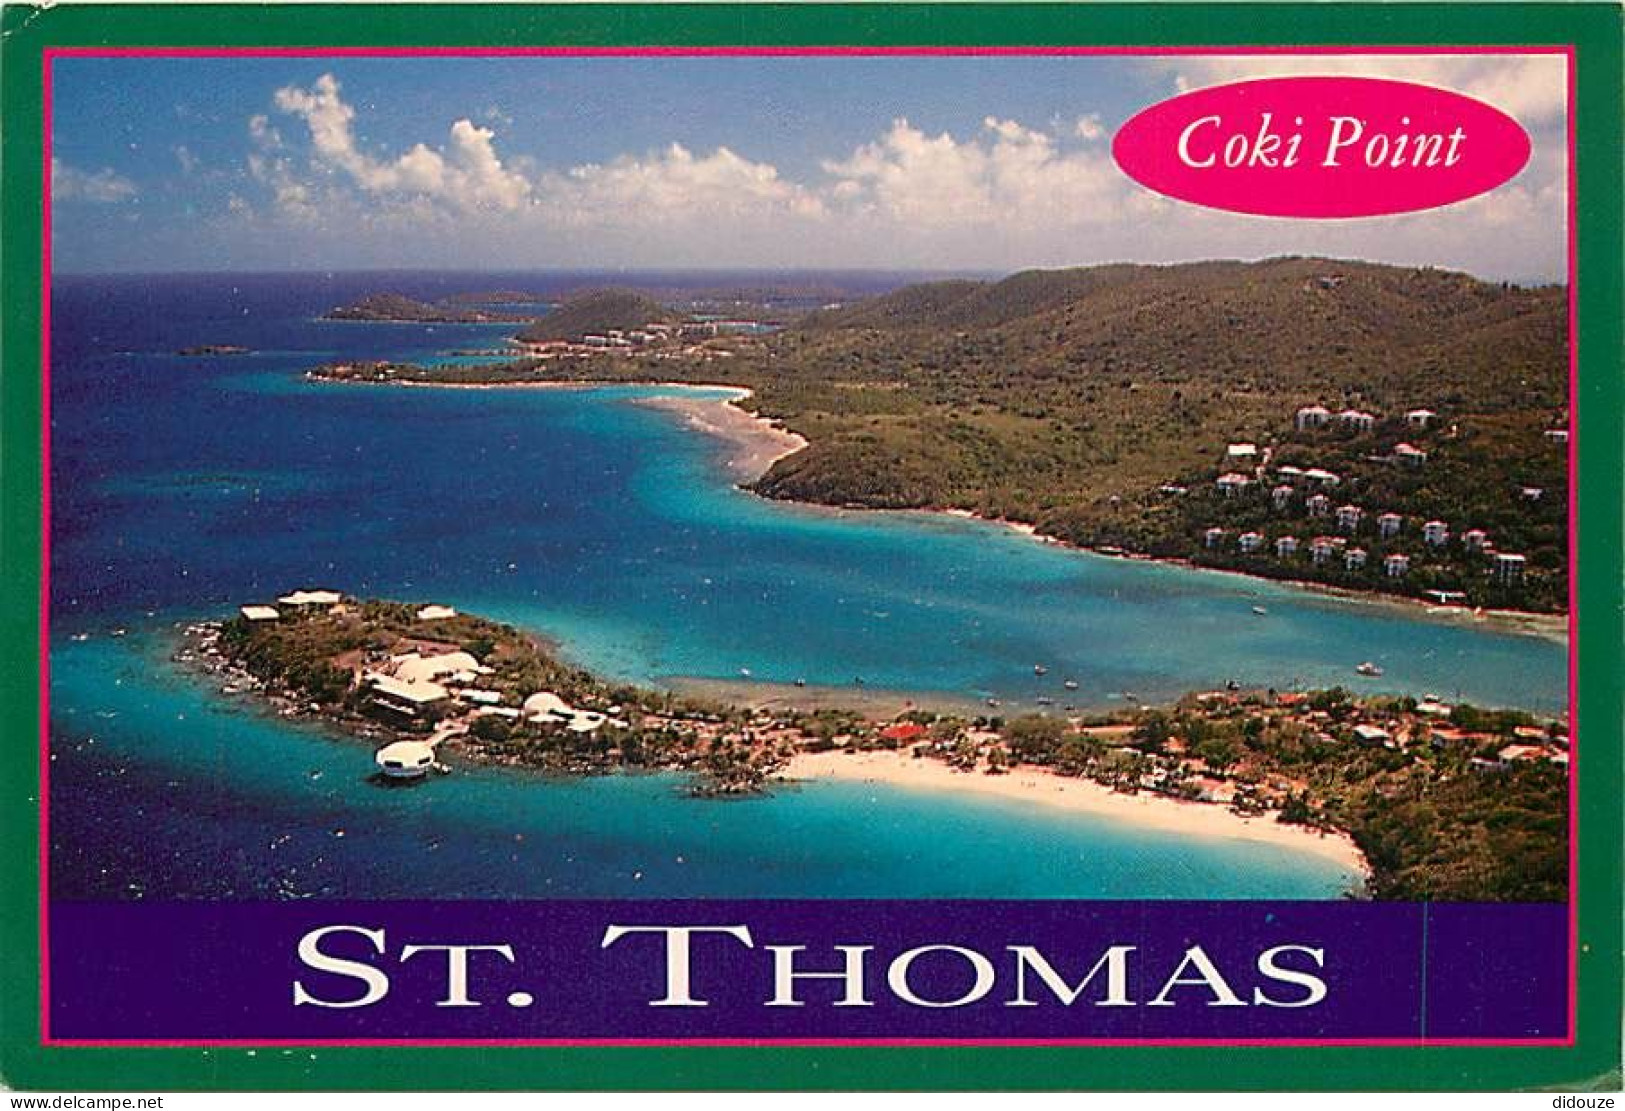 Antilles - Iles Vierges Américaines - U S Virgin Islands - St Thomas - Coki Point Beach And The Coral World Undenwater O - Jungferninseln, Amerik.